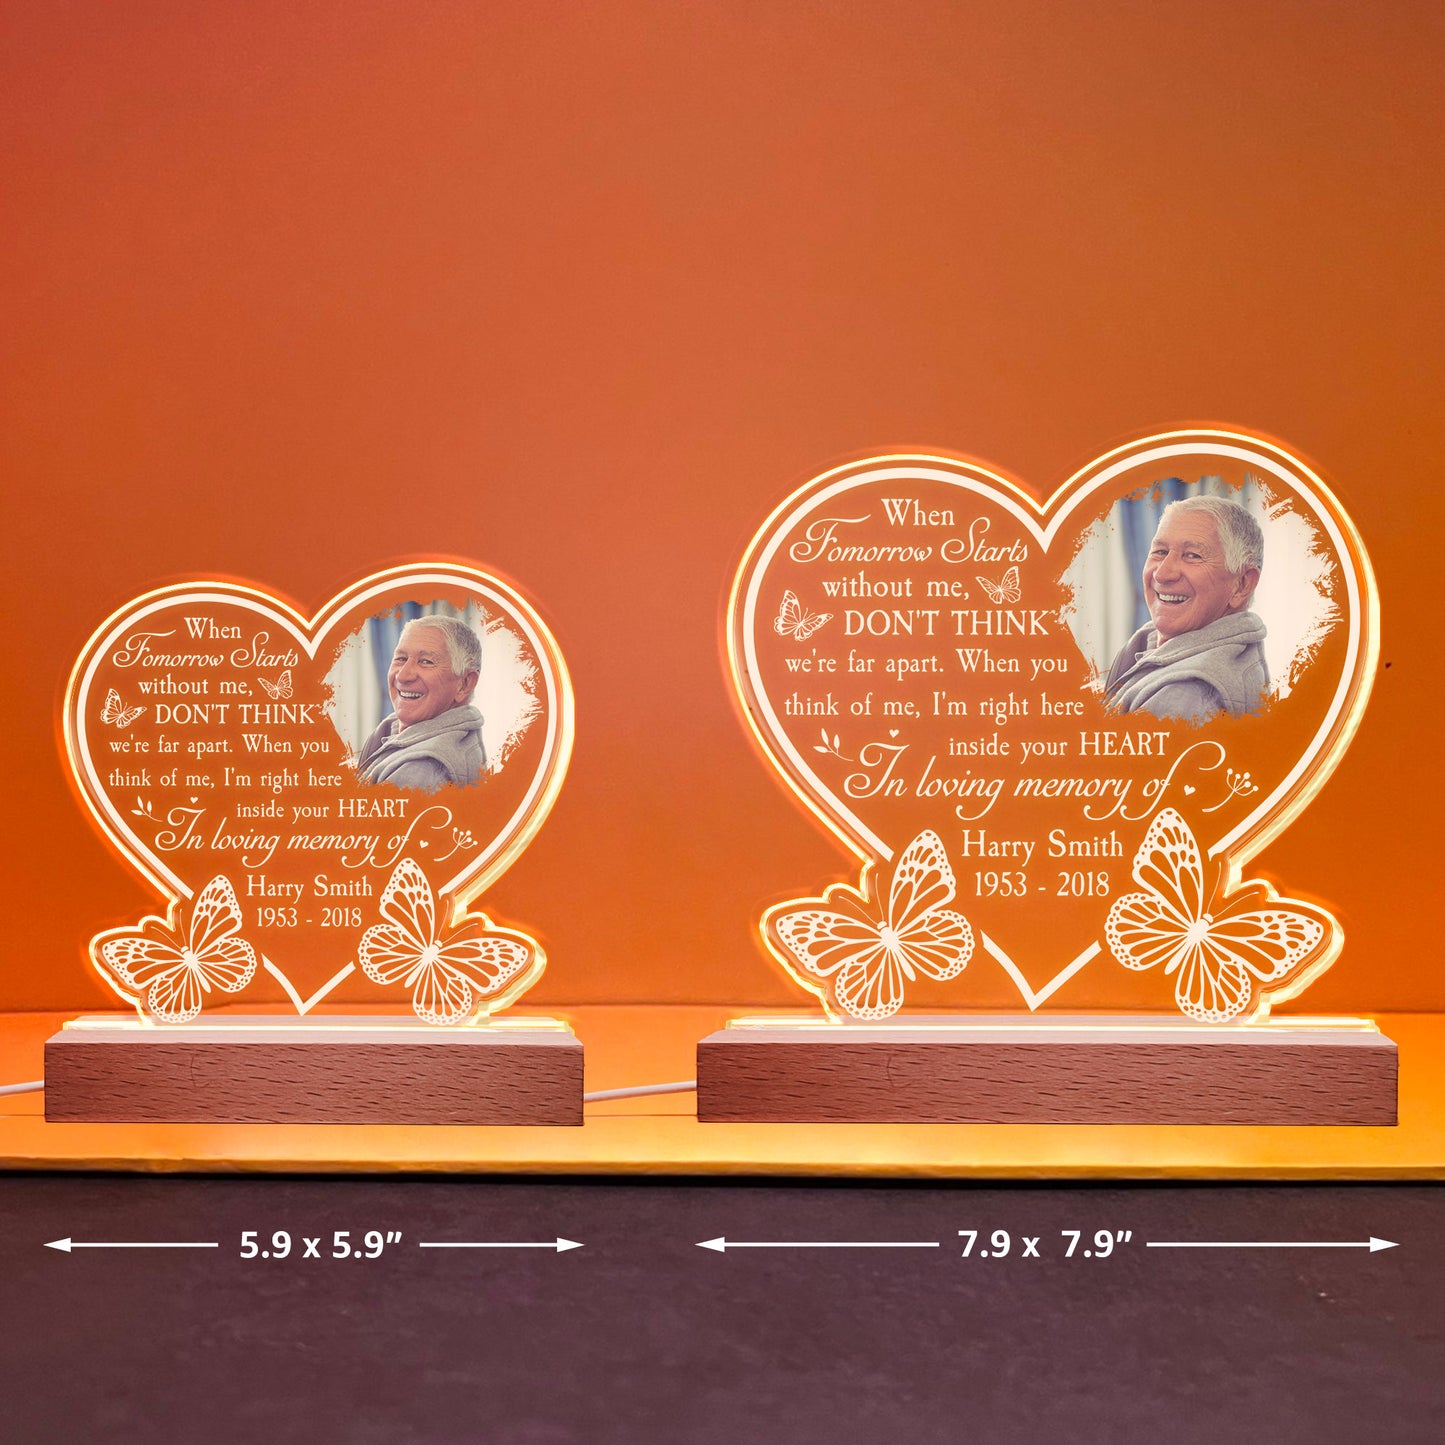 I'm Right Here Inside Your Heart - Personalized Photo LED Light